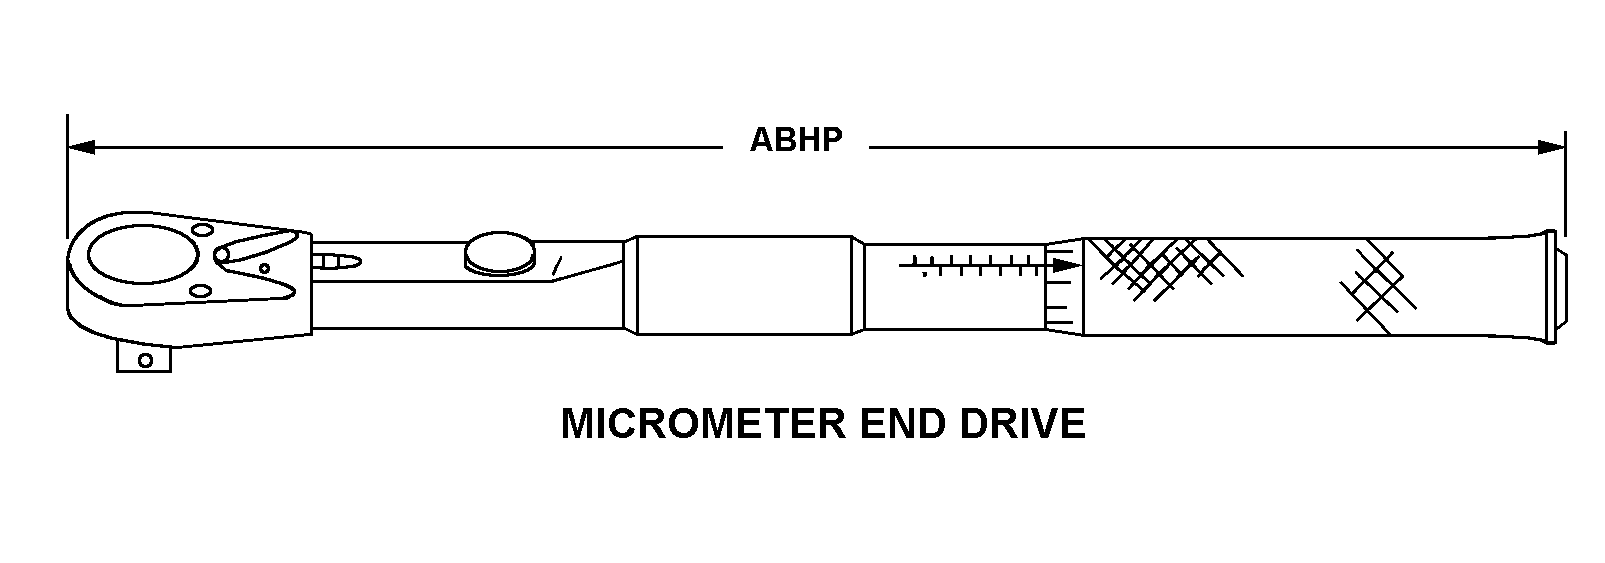 MICROMETER END DRIVE style nsn 5120-01-426-7579